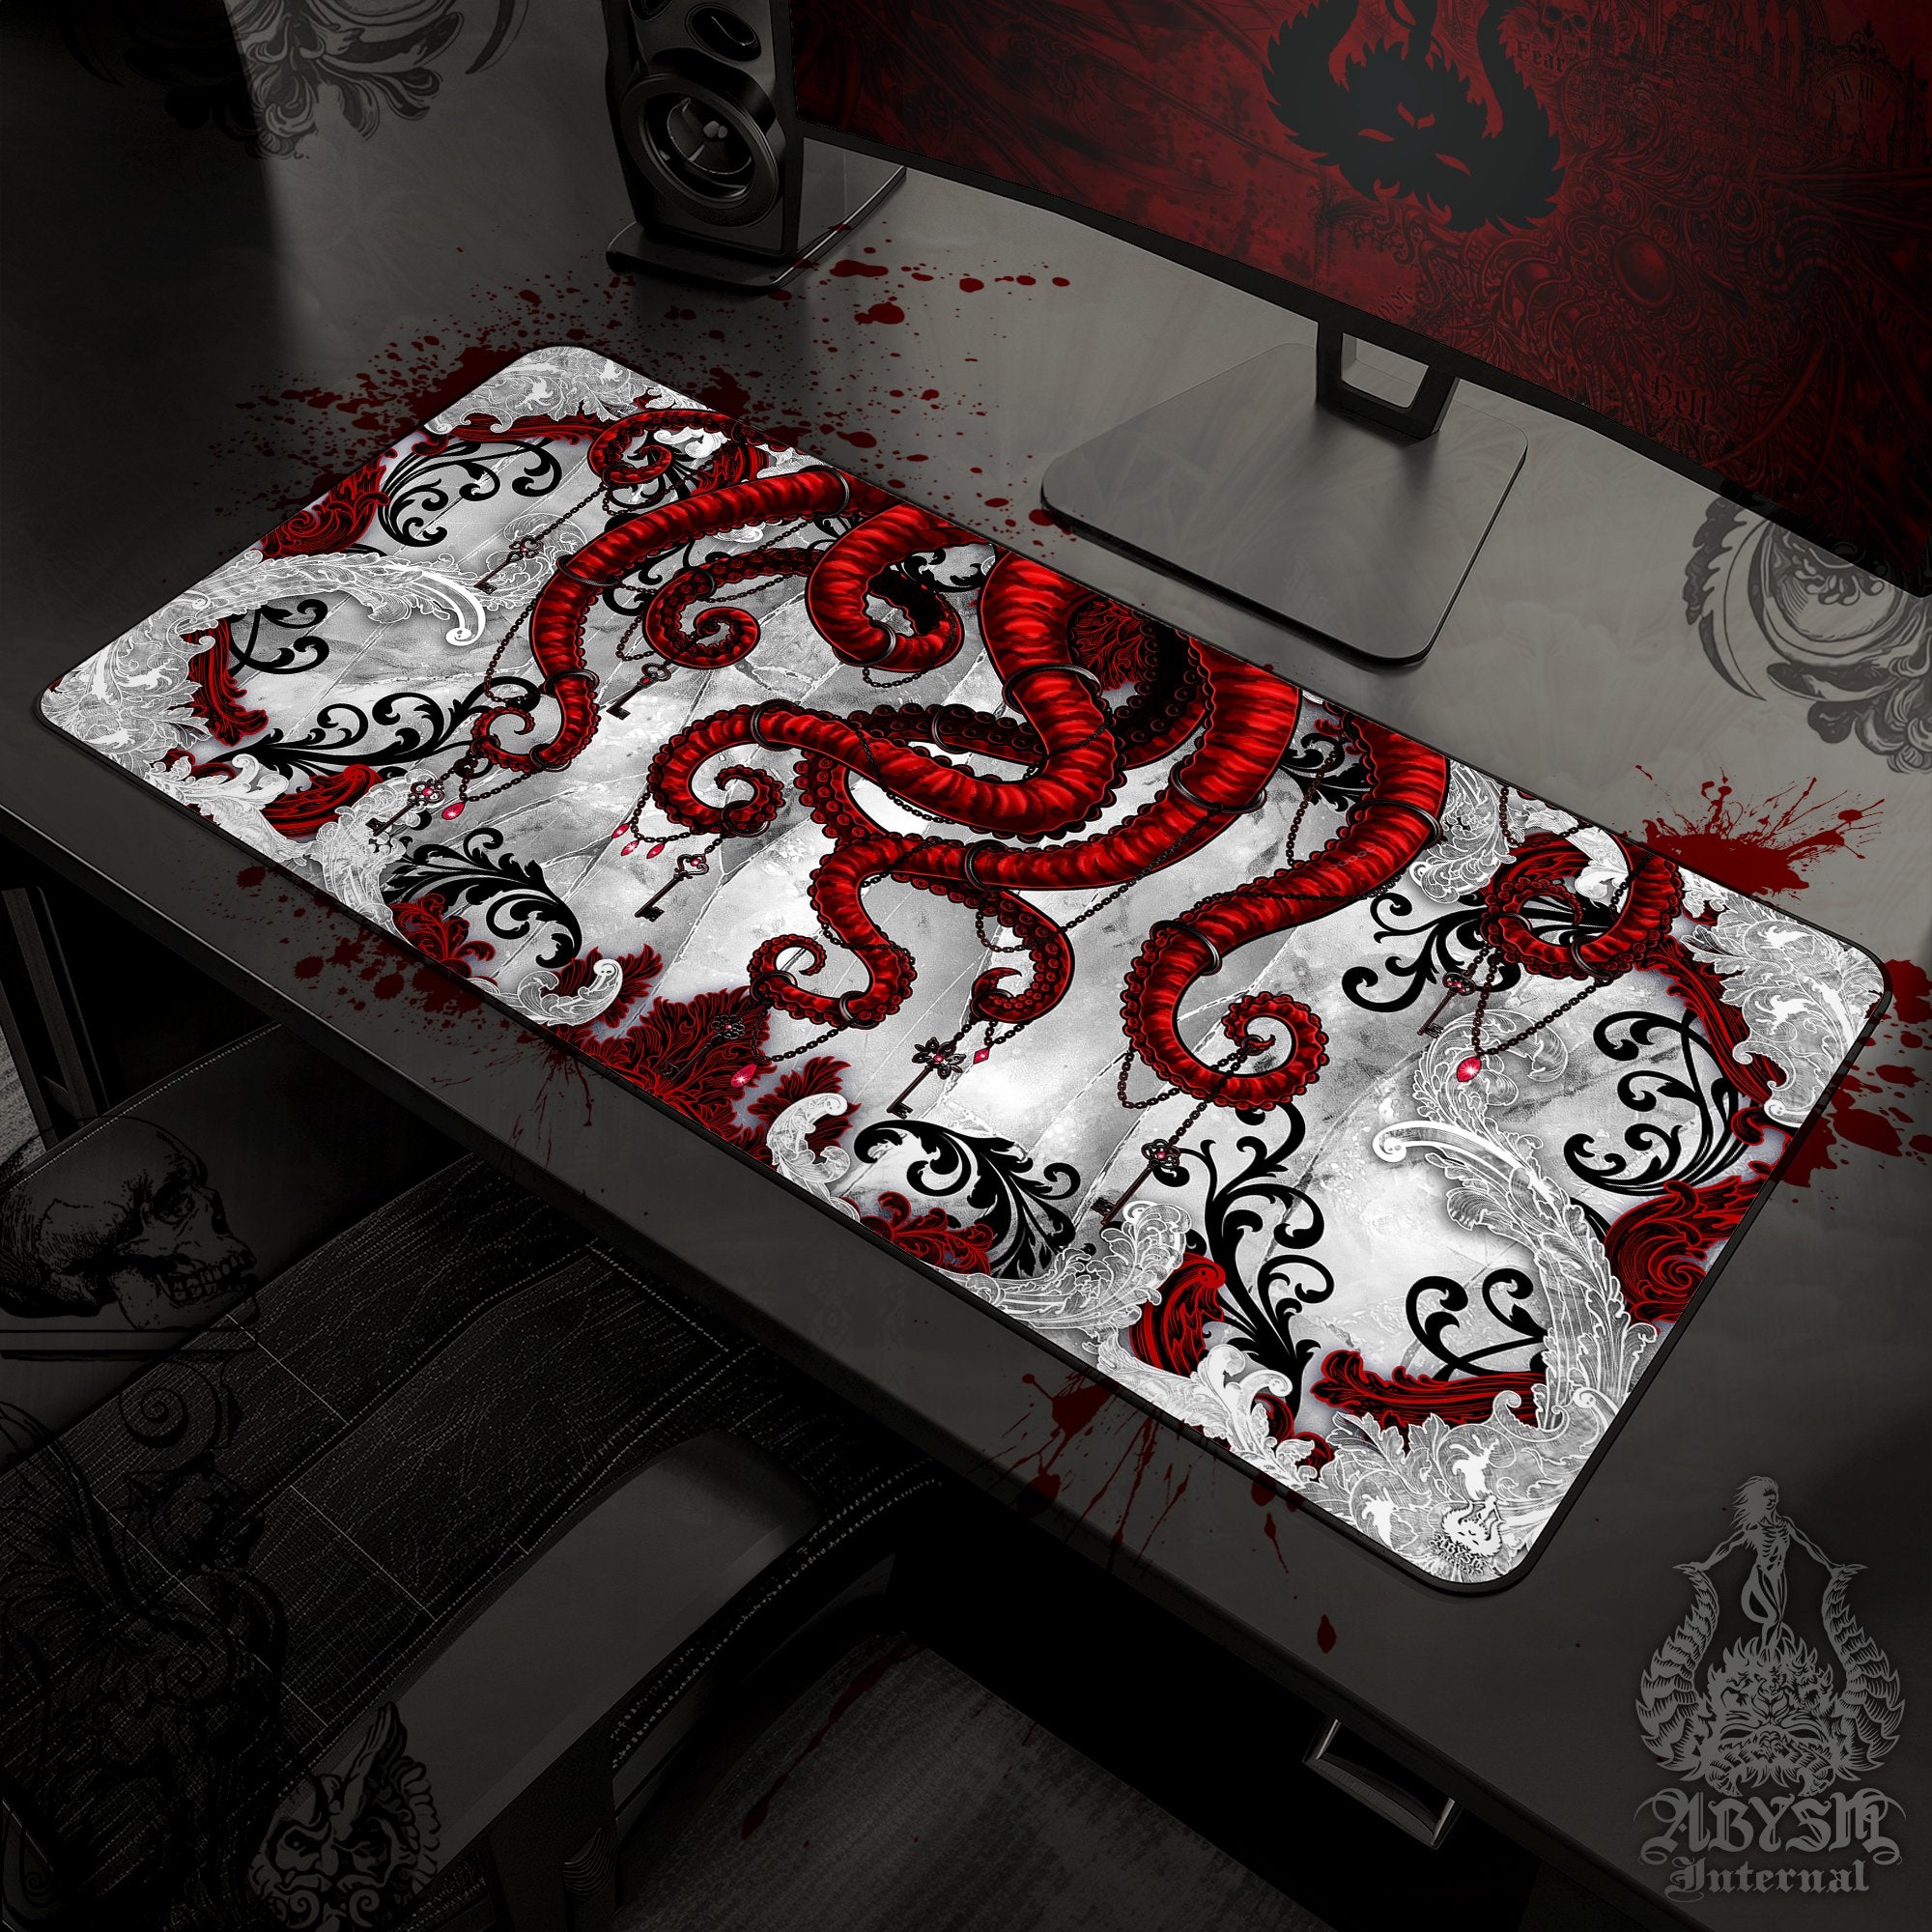 Octopus Gaming Desk Mat, Red Tentacles Mouse Pad, Gothic Gamer Table Protector Cover, Bloody White Goth Workpad, Fantasy Art Print - Abysm Internal